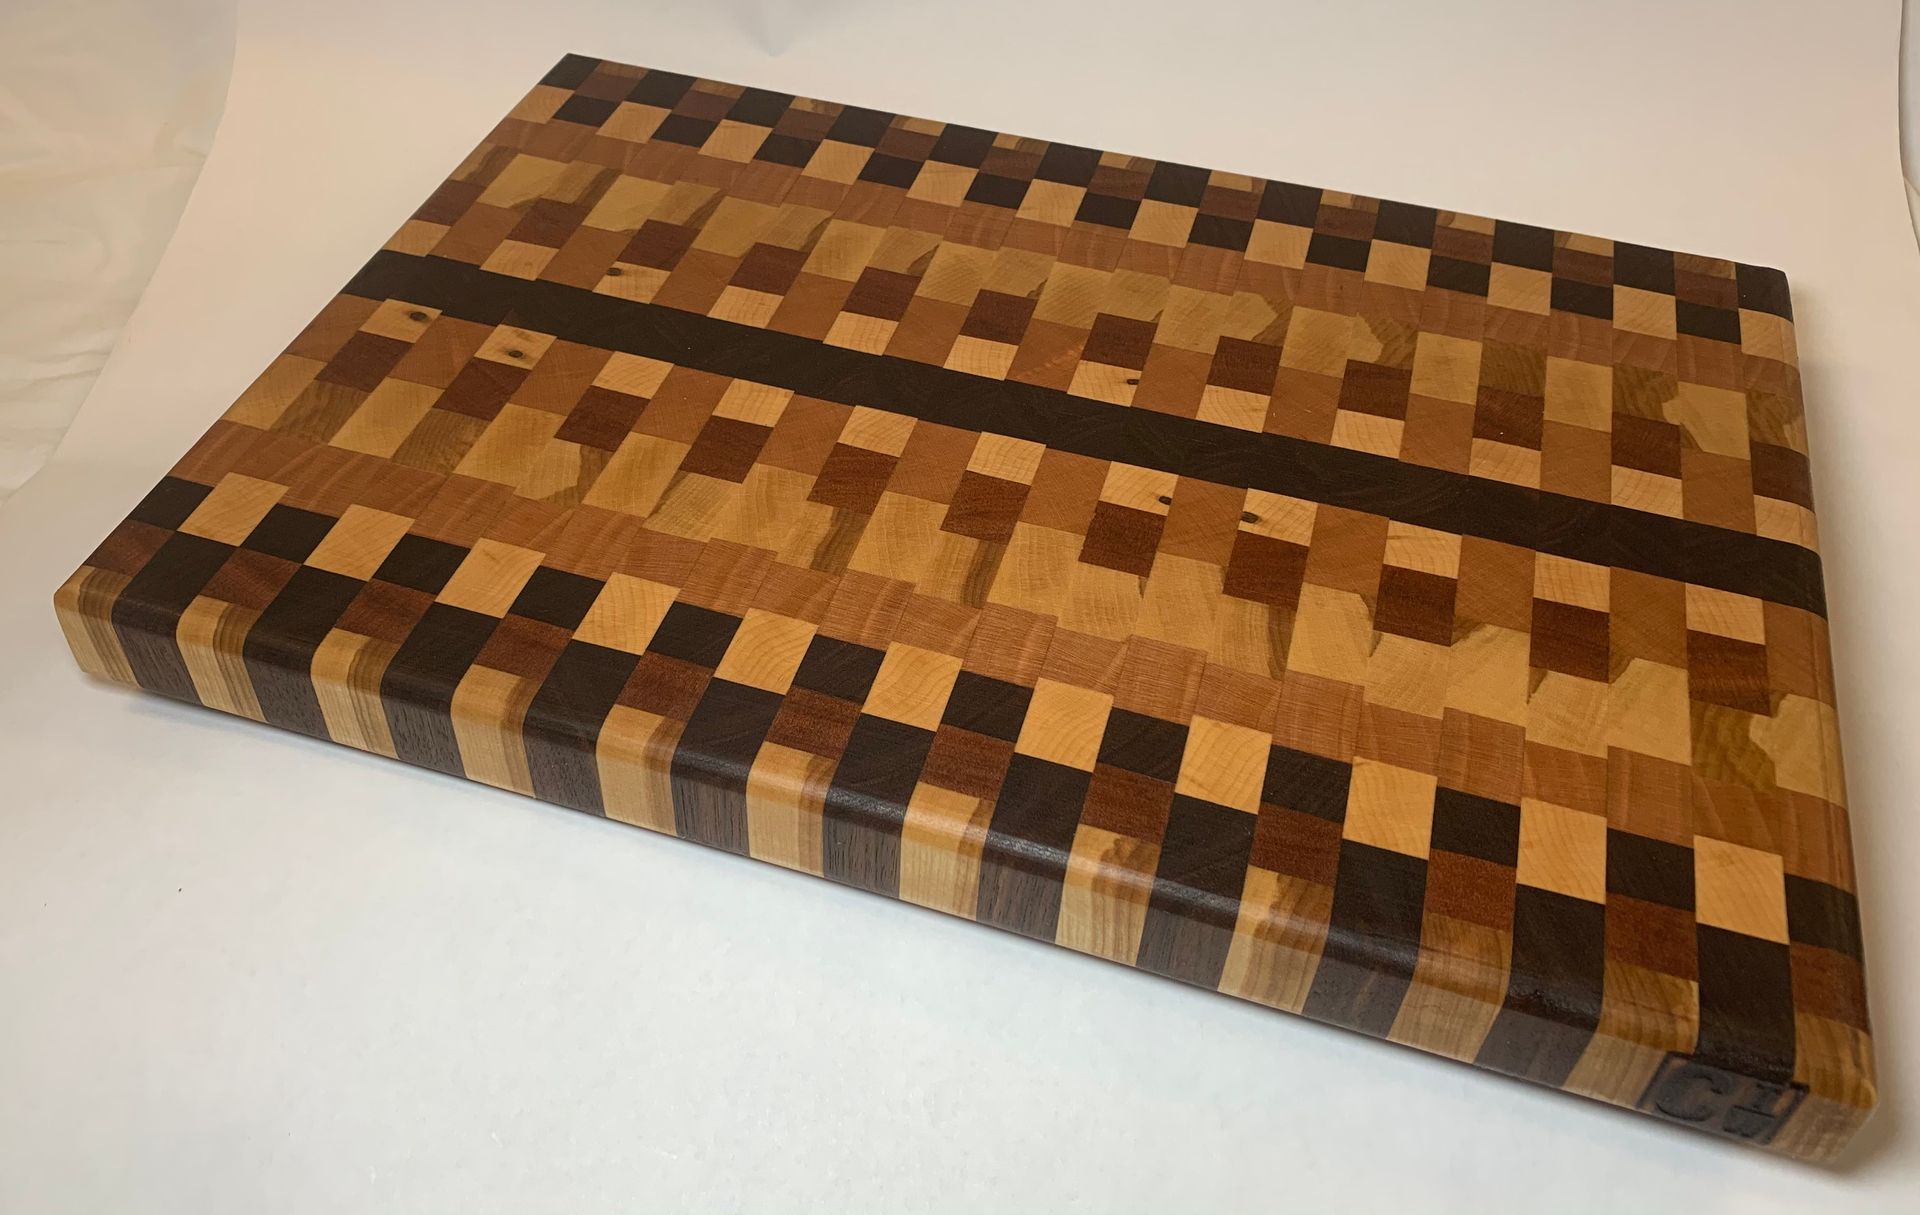 A wooden cutting board with a checkered pattern on it